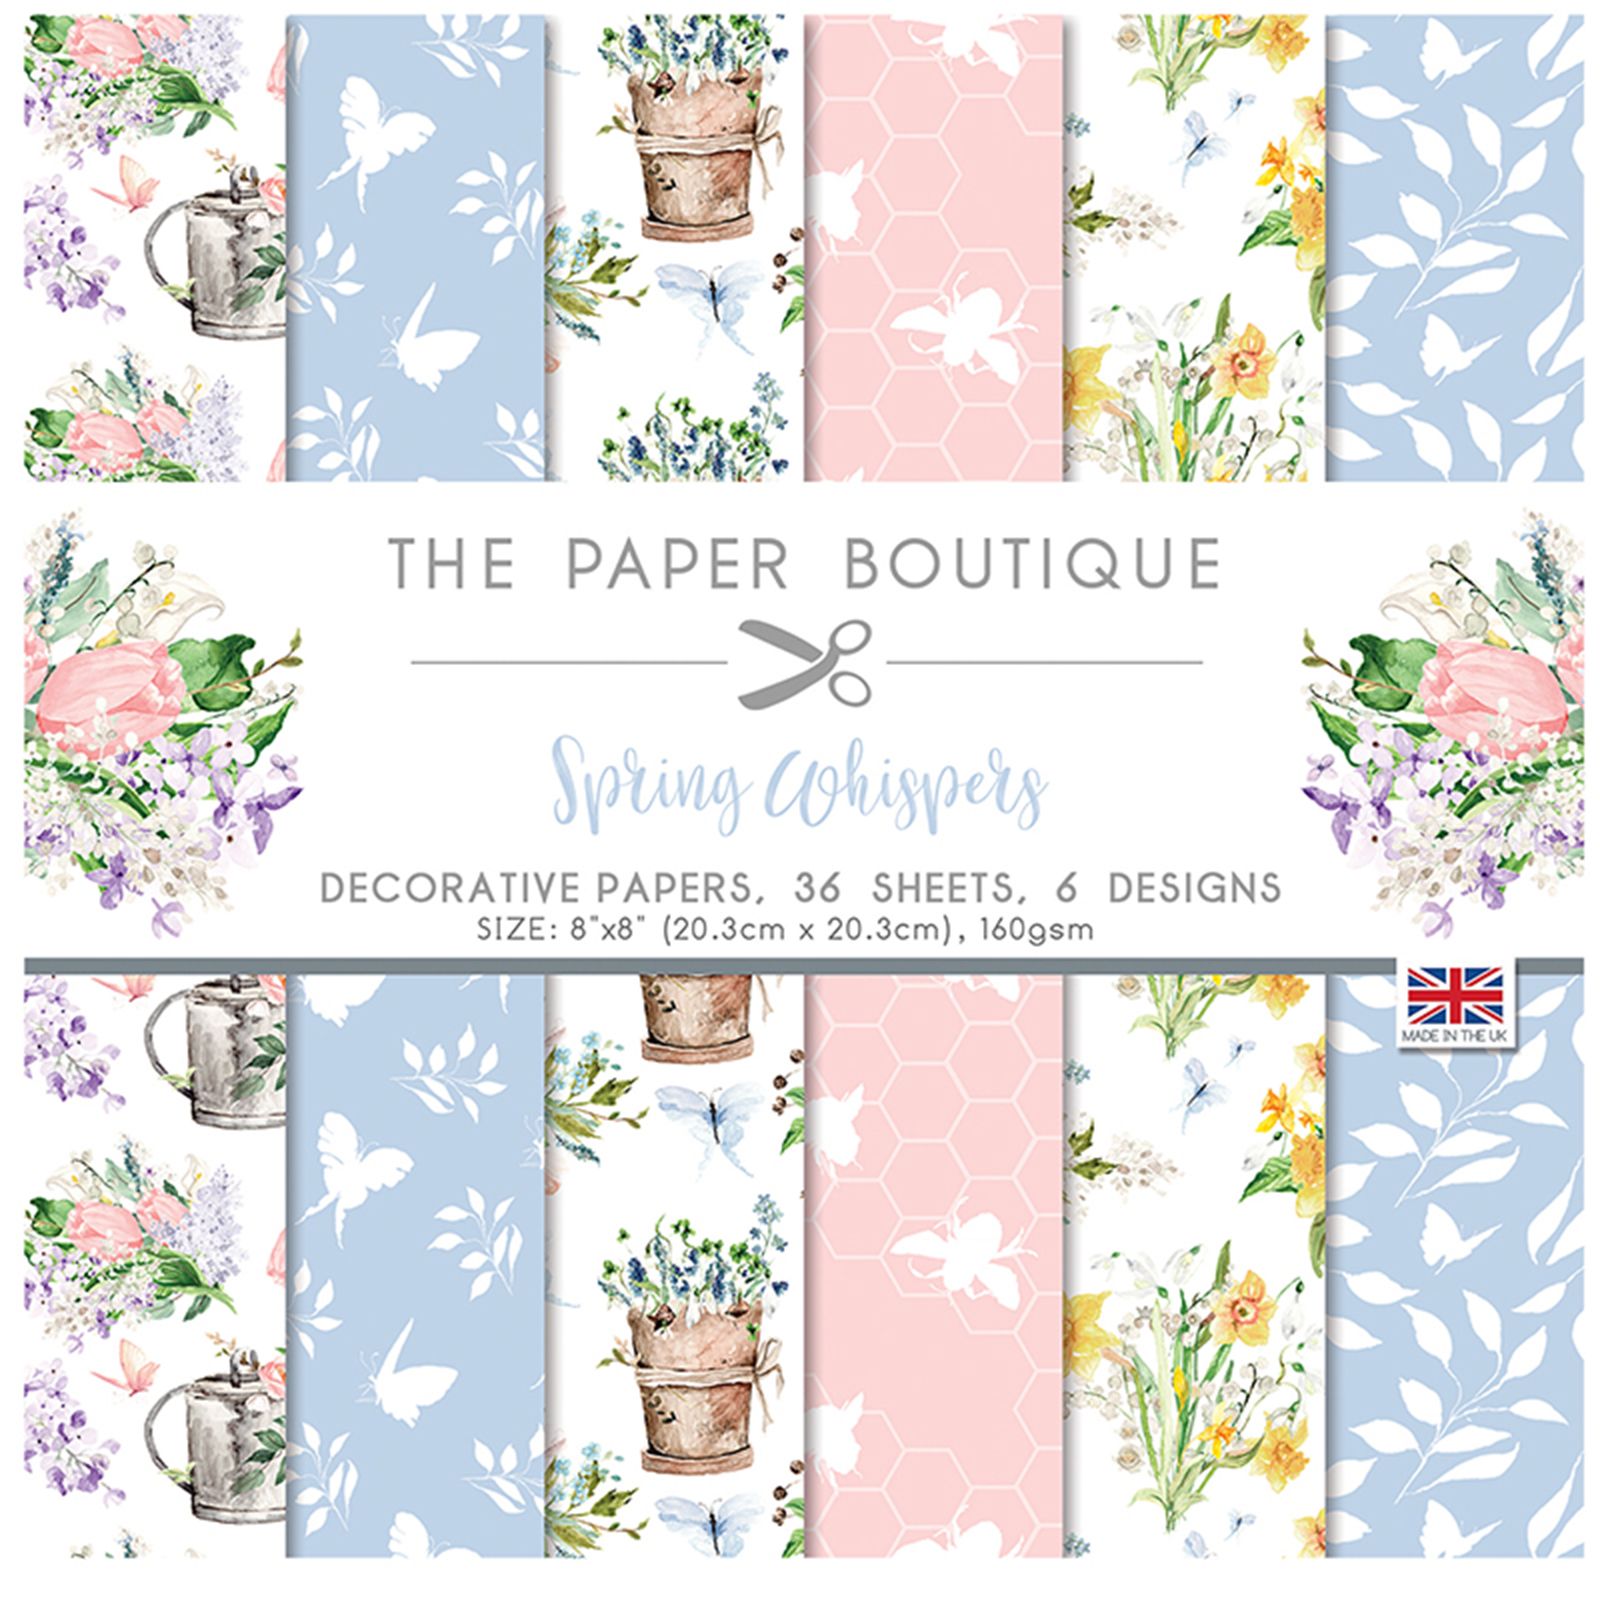 The Paper Boutique • Spring whispers decorative papers 8x8"